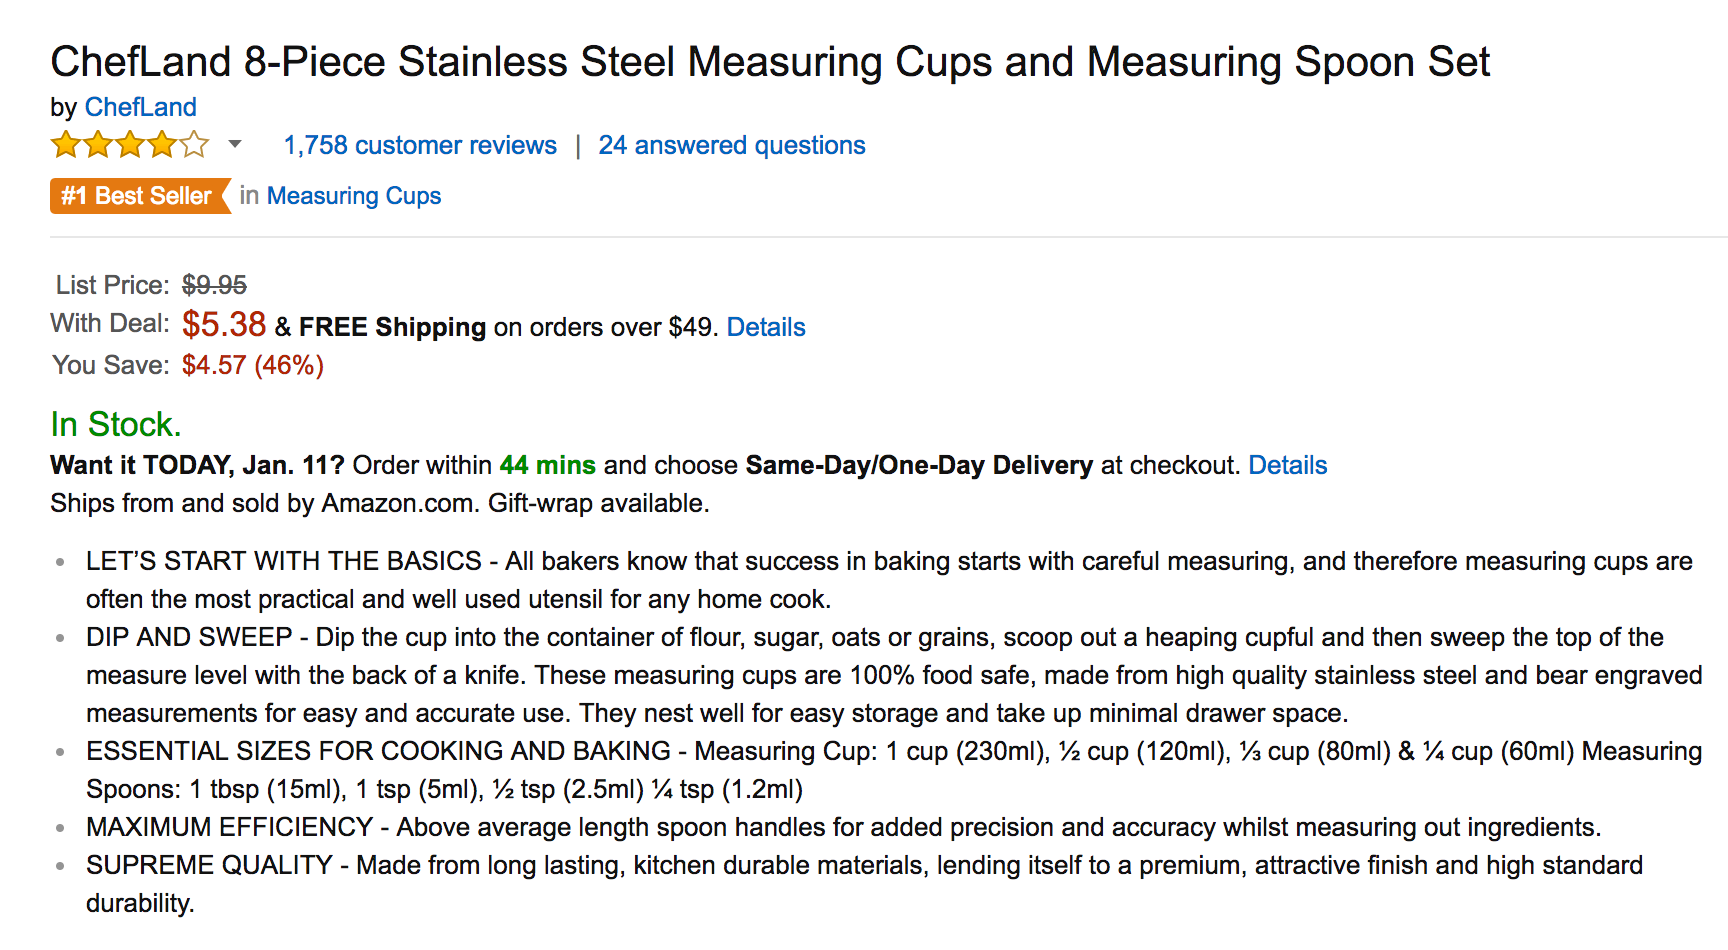 chefland-8-piece-stainless-steel-measuring-cups-and-measuring-spoon-set-2